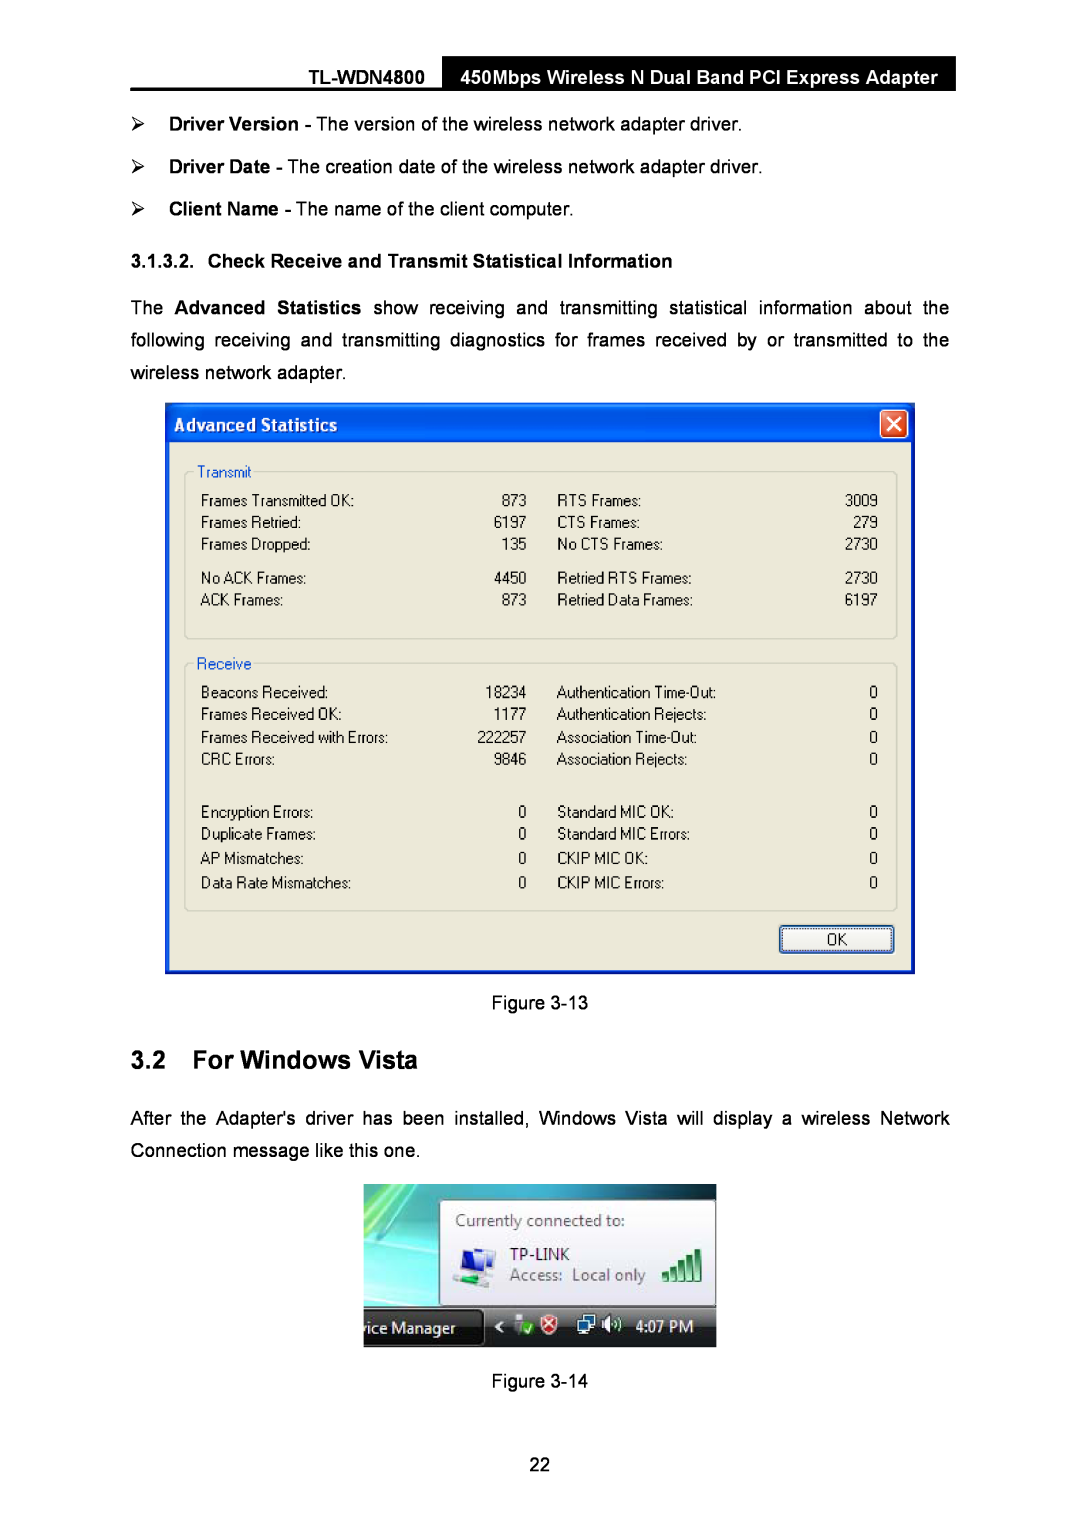 TP-Link TL-WDN4800 manual For Windows Vista, 450Mbps Wireless N Dual Band PCI Express Adapter 